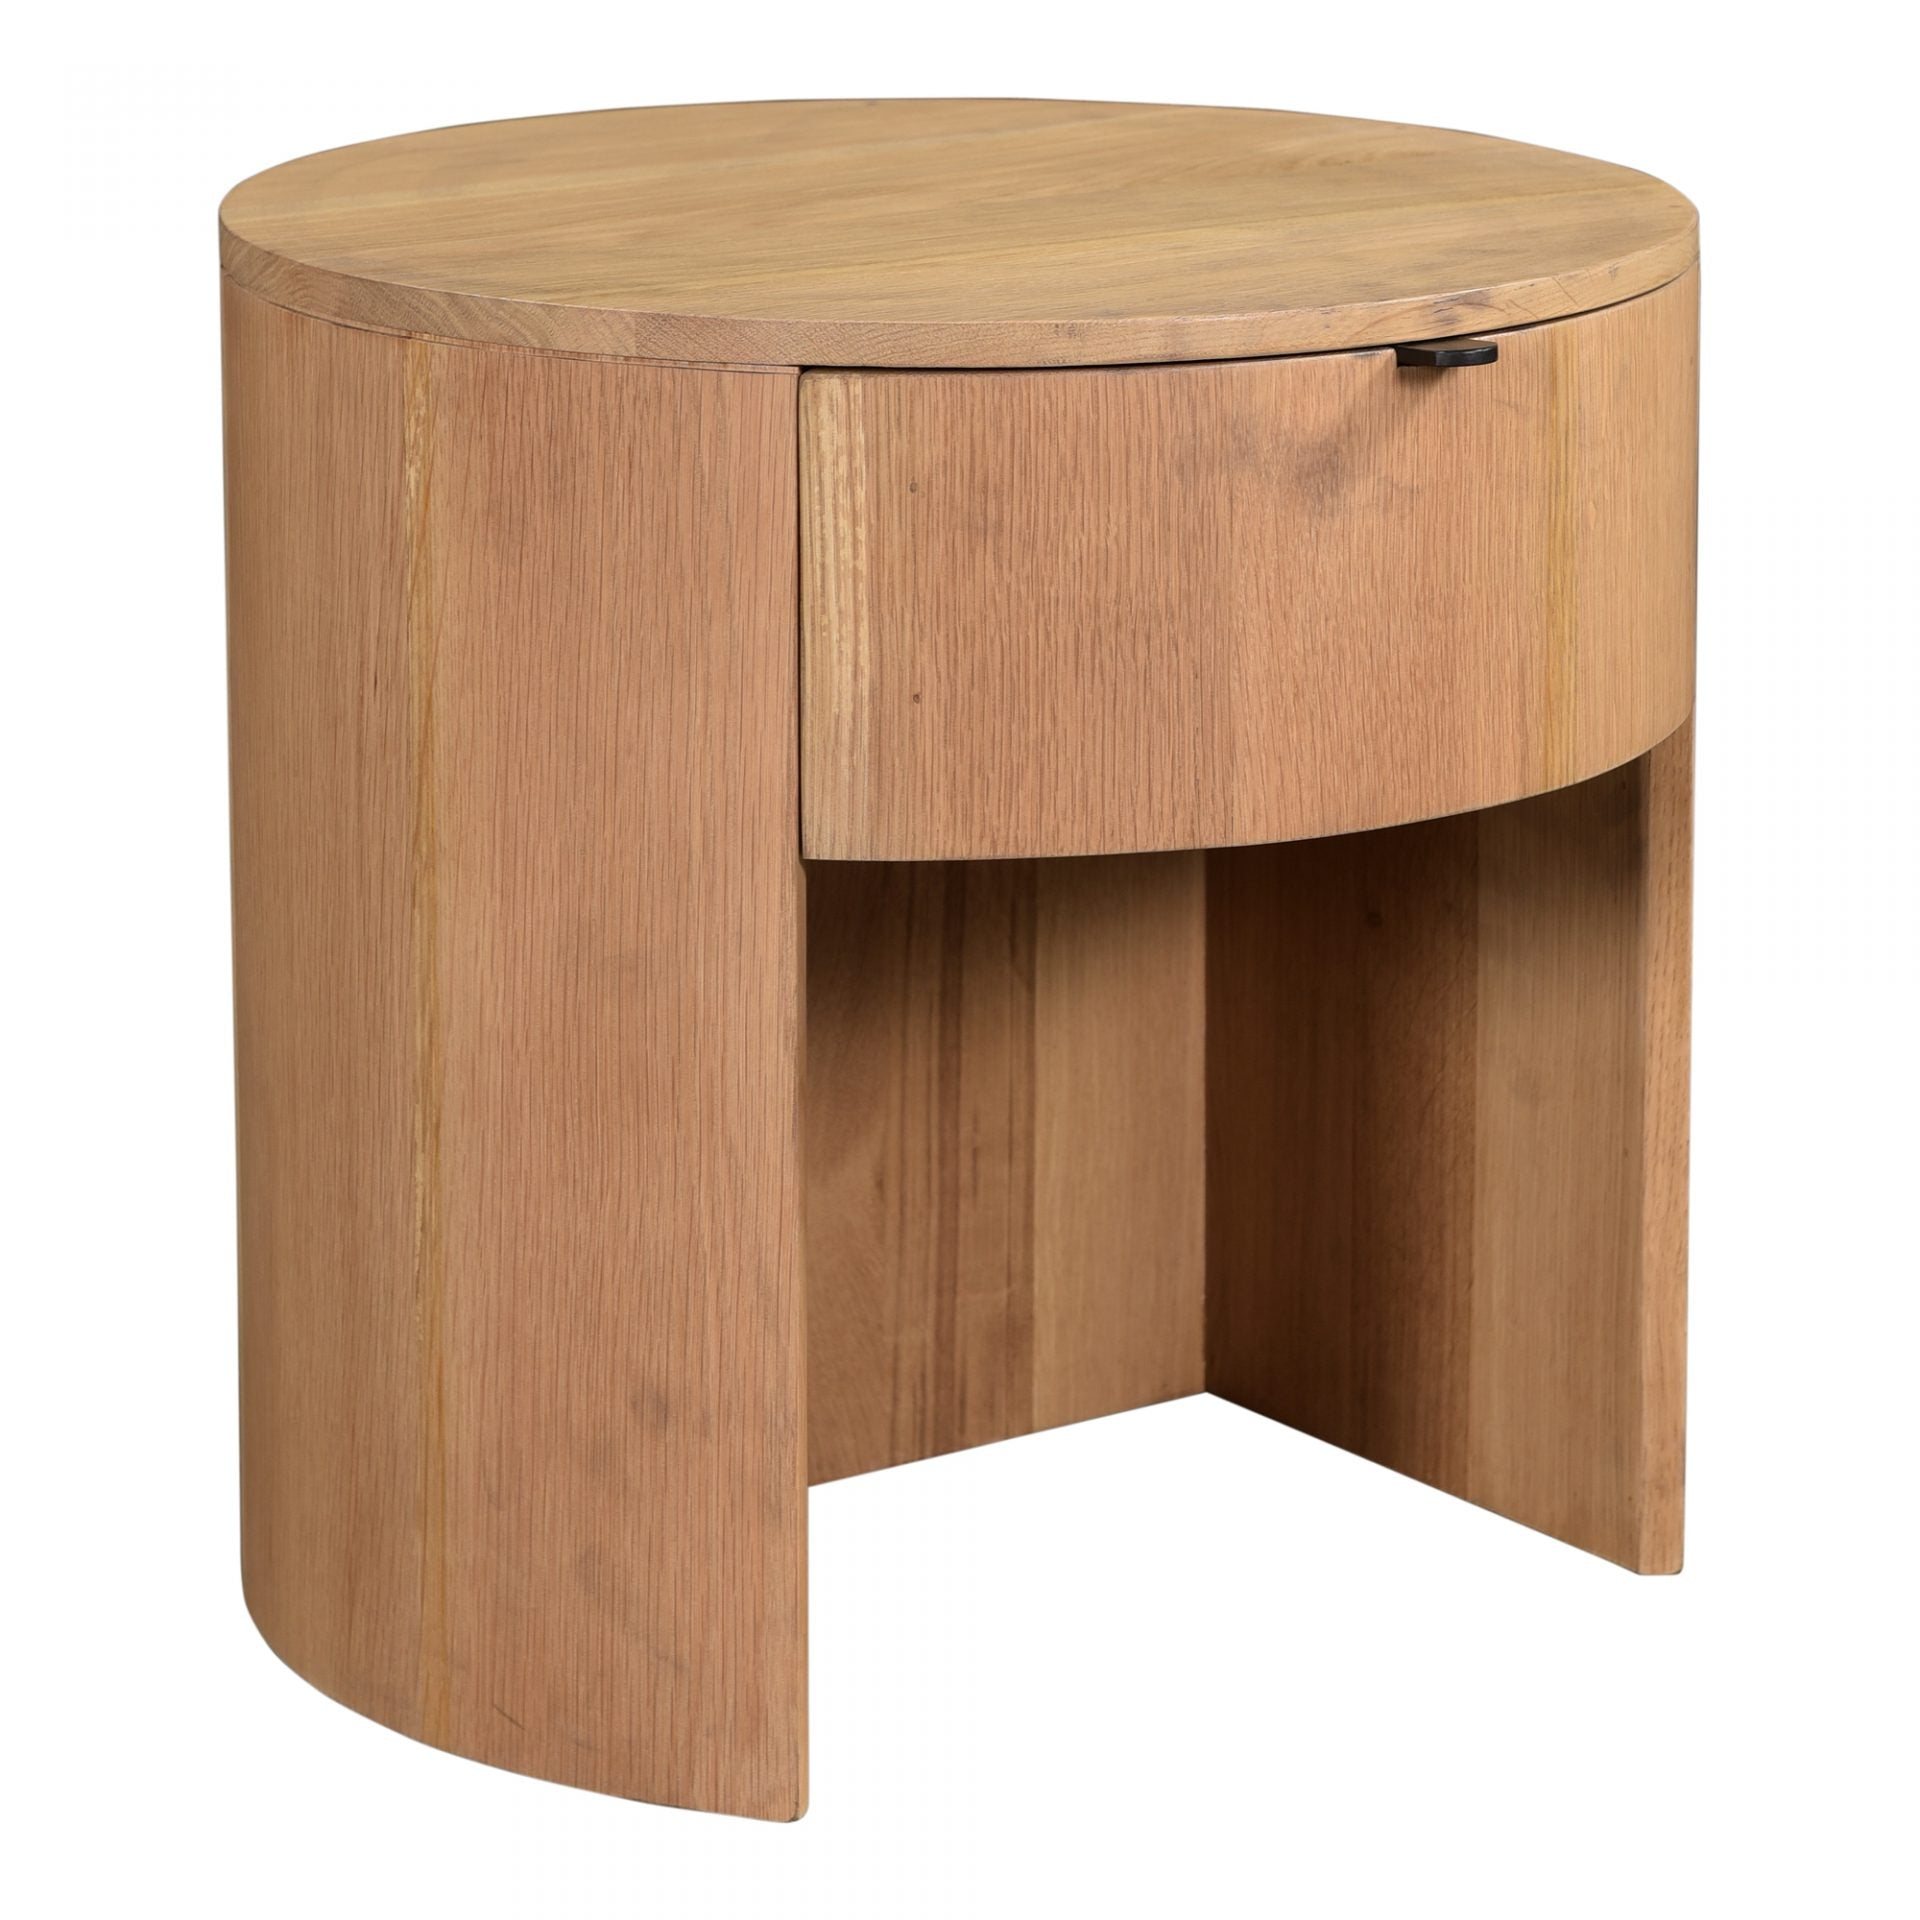 Made from solid oak and a natural finish, the Theo Nightsand gives us all the natural, earthy vibes. The drawer makes this an extremely function, contemporary piece to add to your room.   Size: 19"W x 19"D x 18.5"H Material: Solid Oak